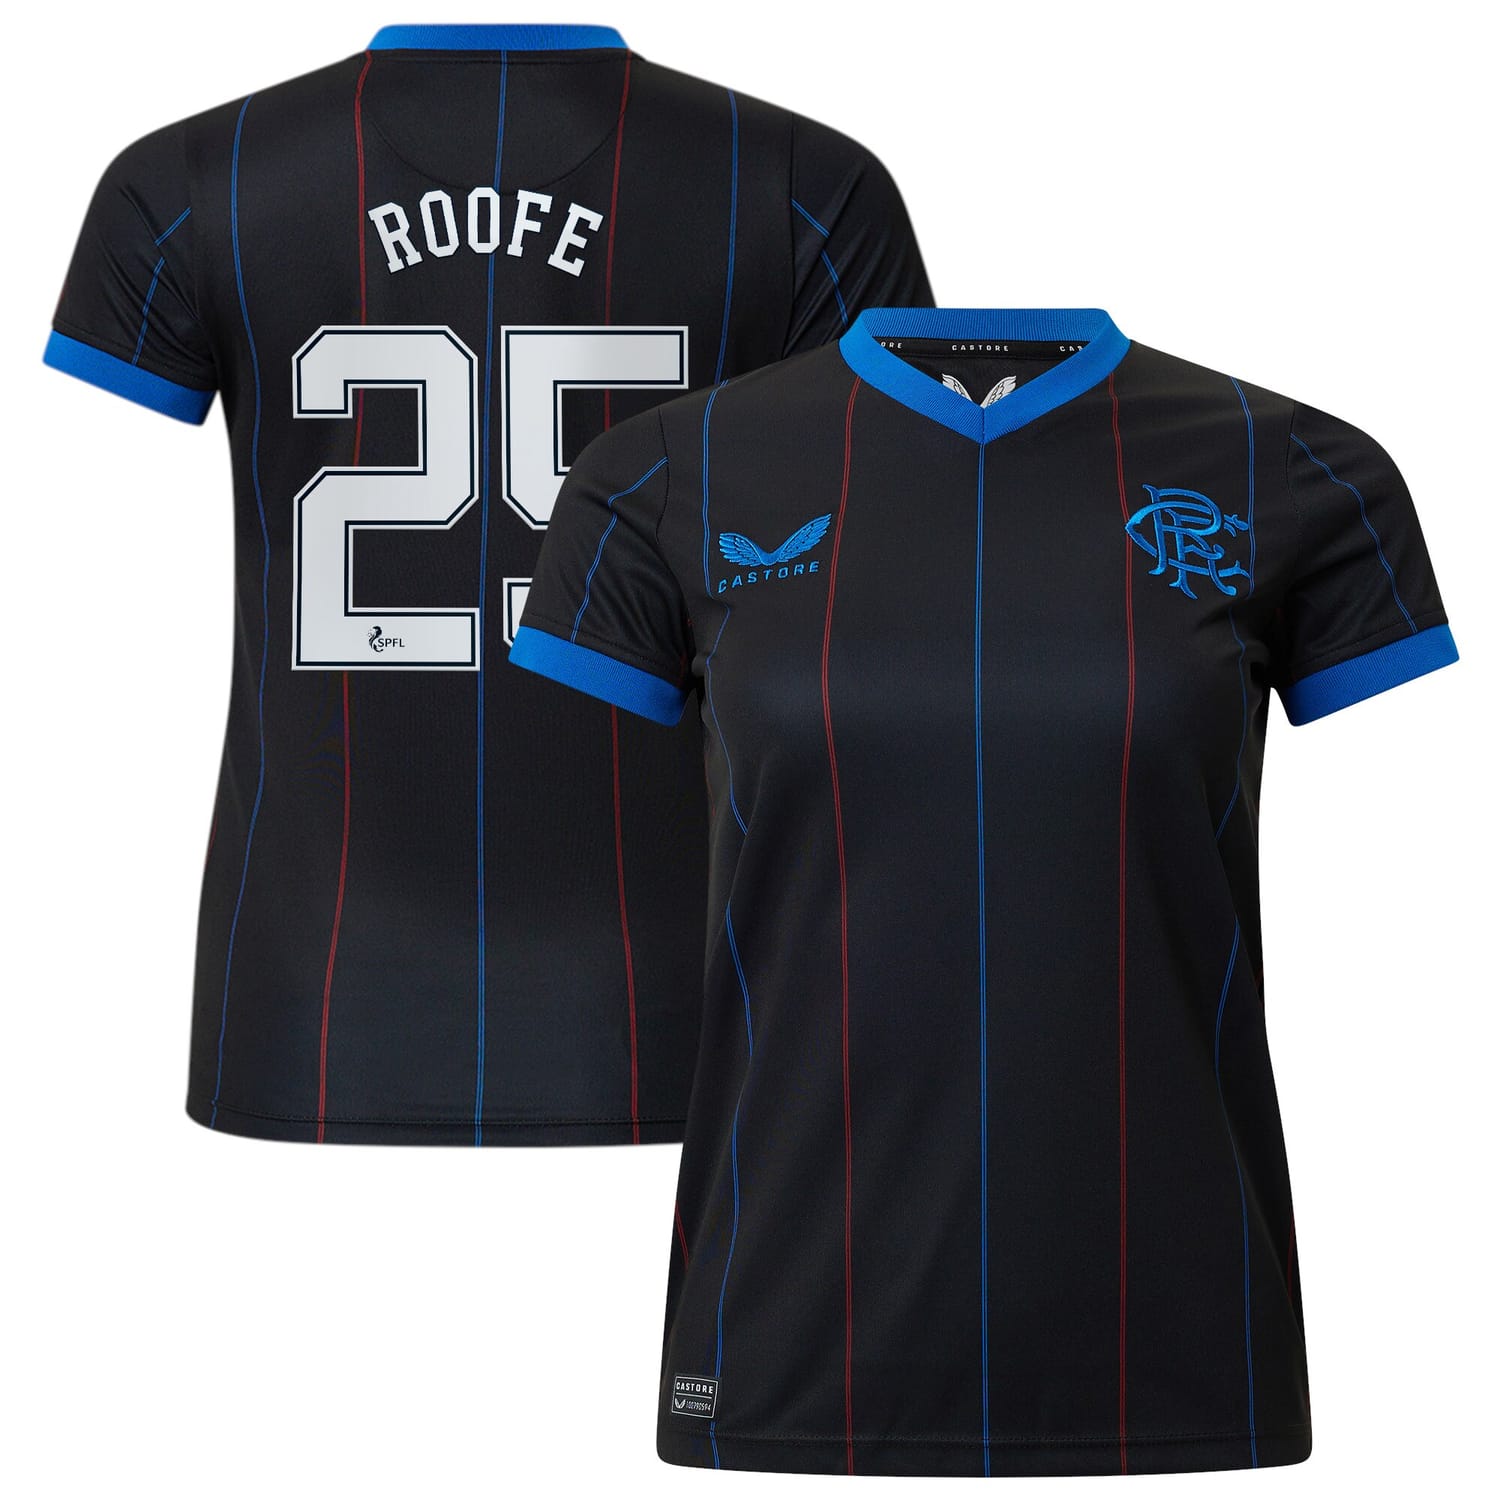 Scottish Premiership Rangers FC Fourth Jersey Shirt 2022-23 player Roofe 25 printing for Women